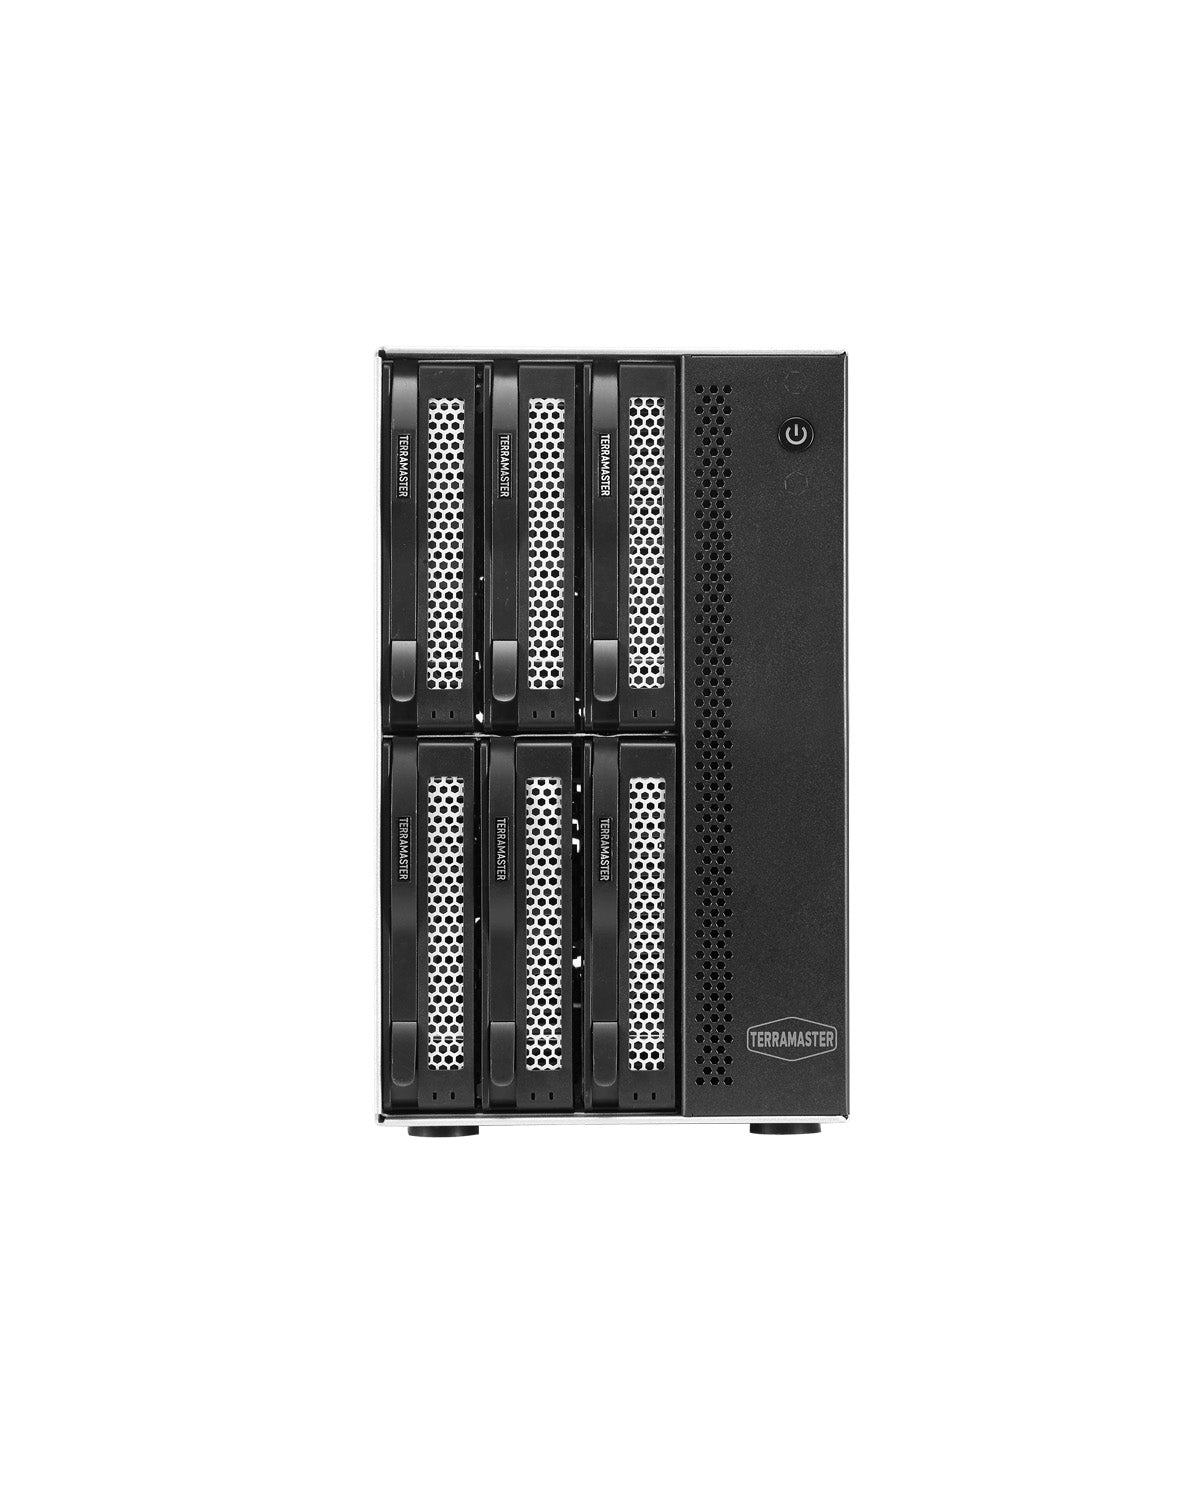 TERRAMASTER T6-423 6 Bay NAS Storage - High Performance 2.5GbE NAS for SMB with Intel Quad-core CPU 4GB DDR4 Memory, 2.5GbE Port x 2, Network Storage Server, Diskless